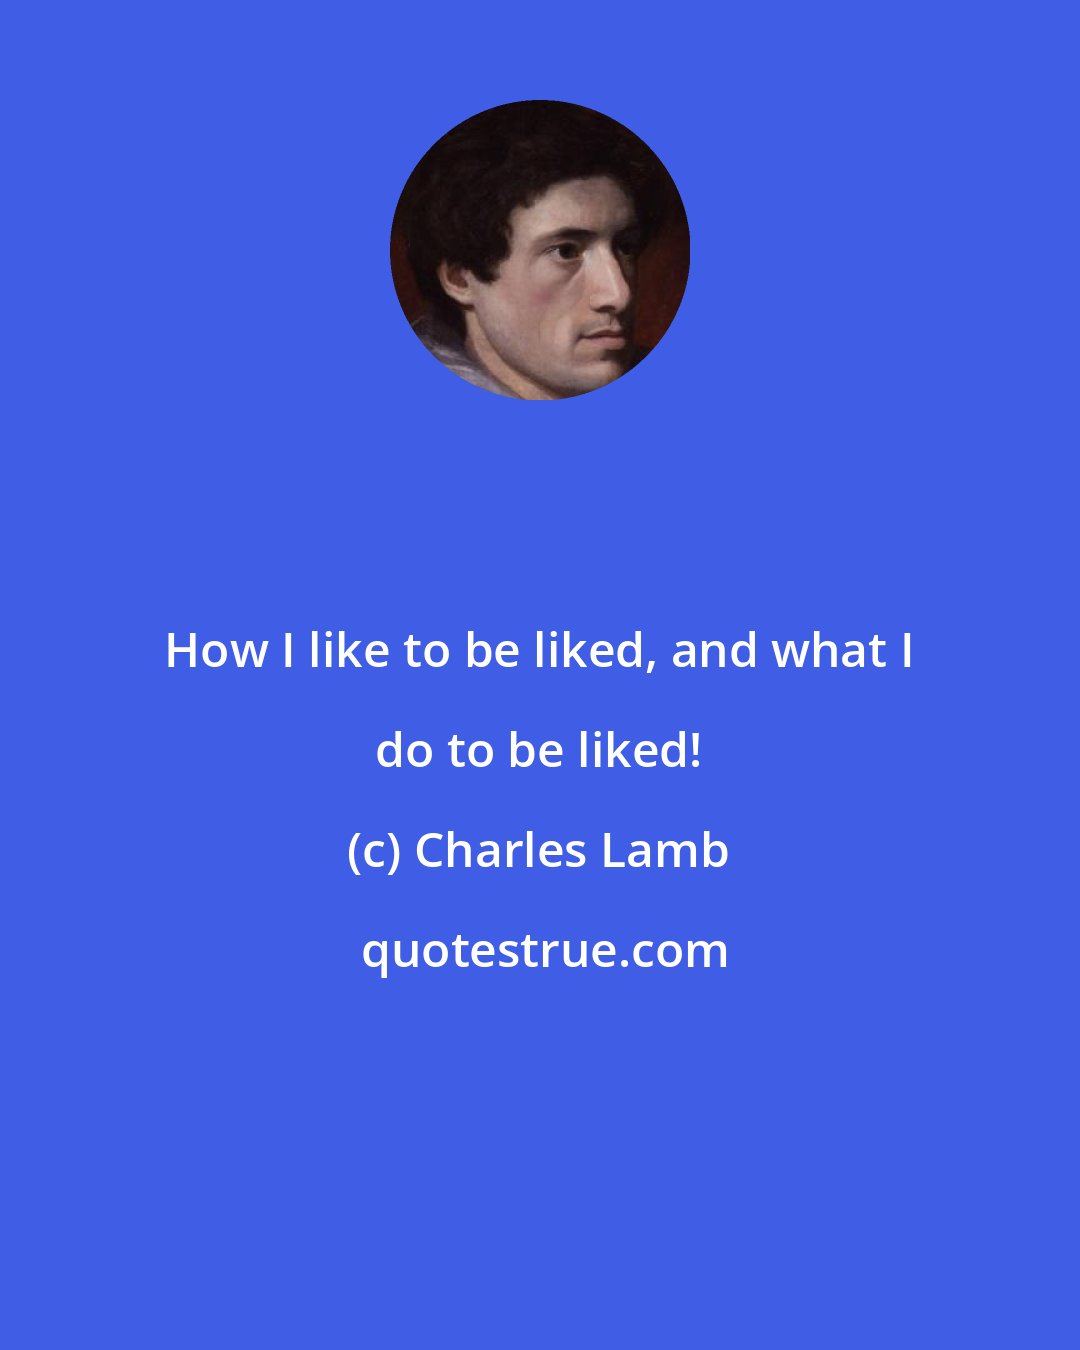 Charles Lamb: How I like to be liked, and what I do to be liked!